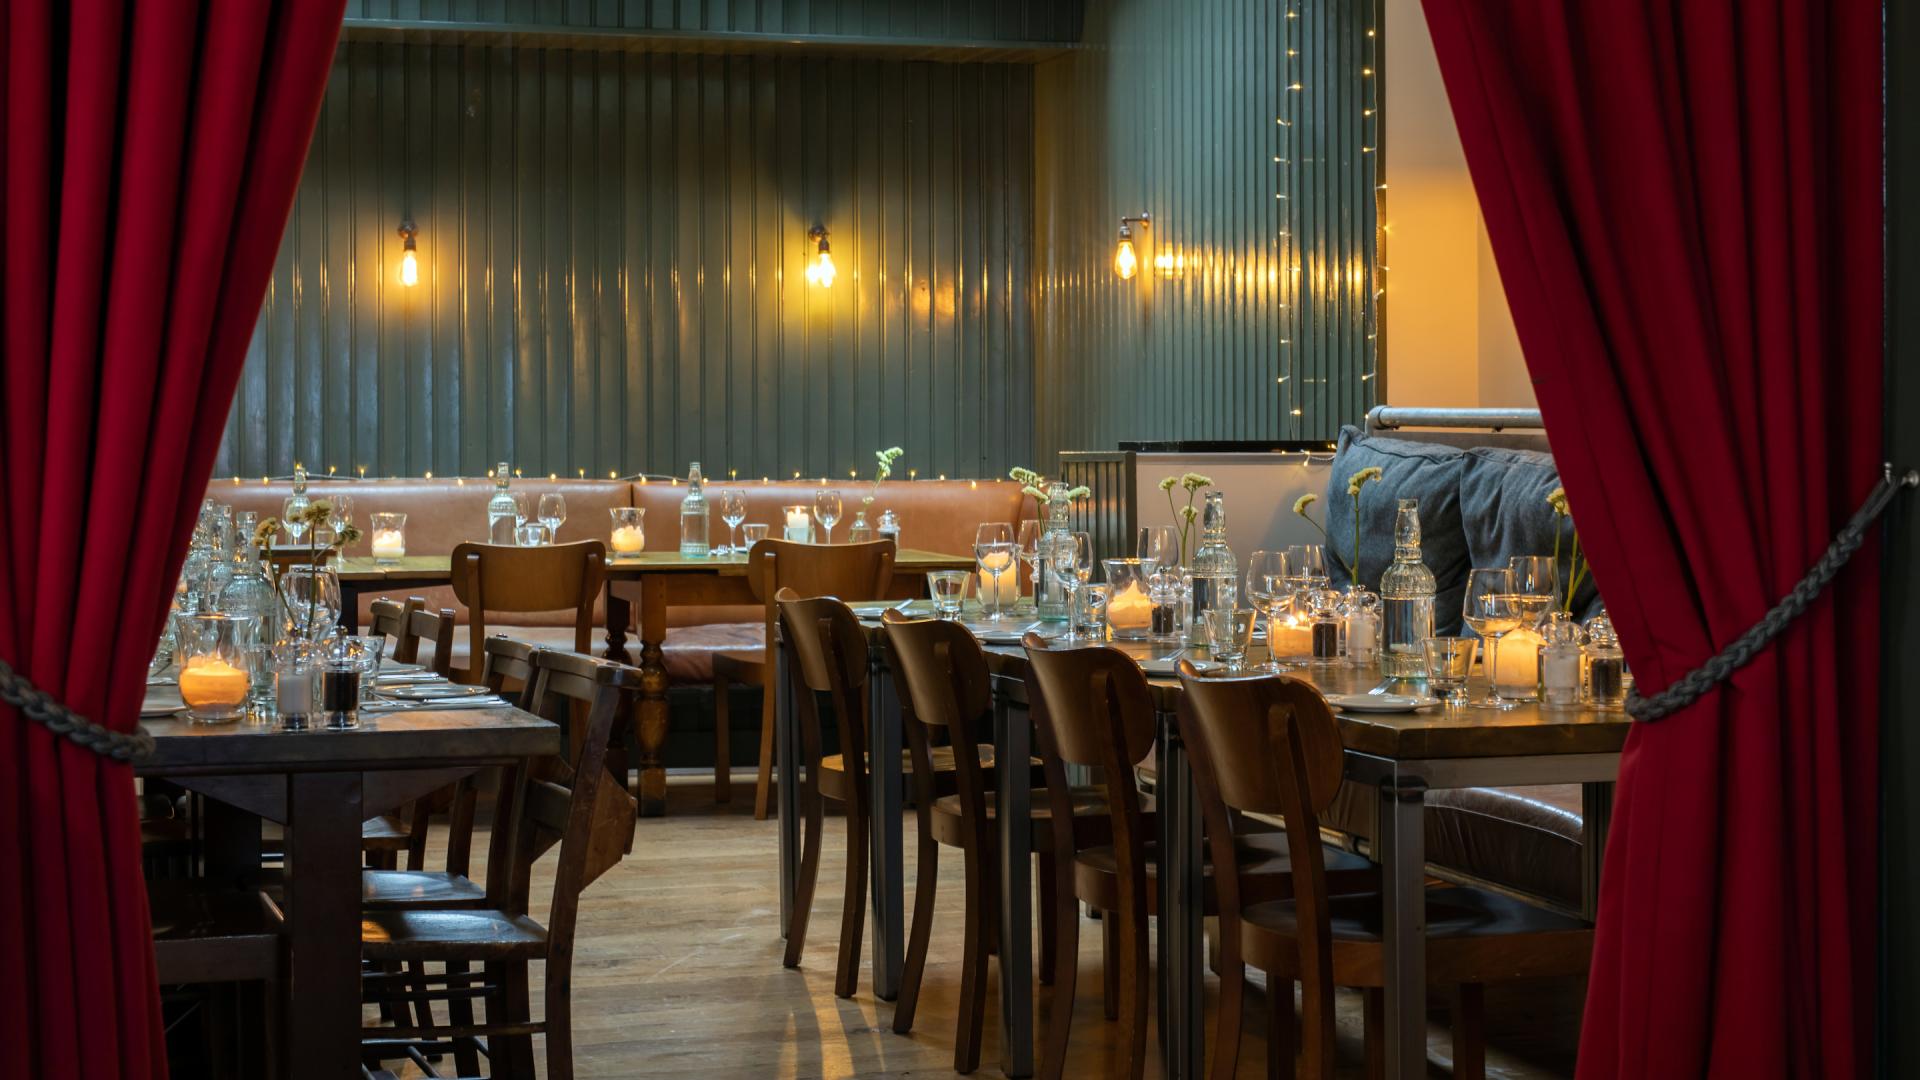 Pubs with Function Rooms for Hire in London